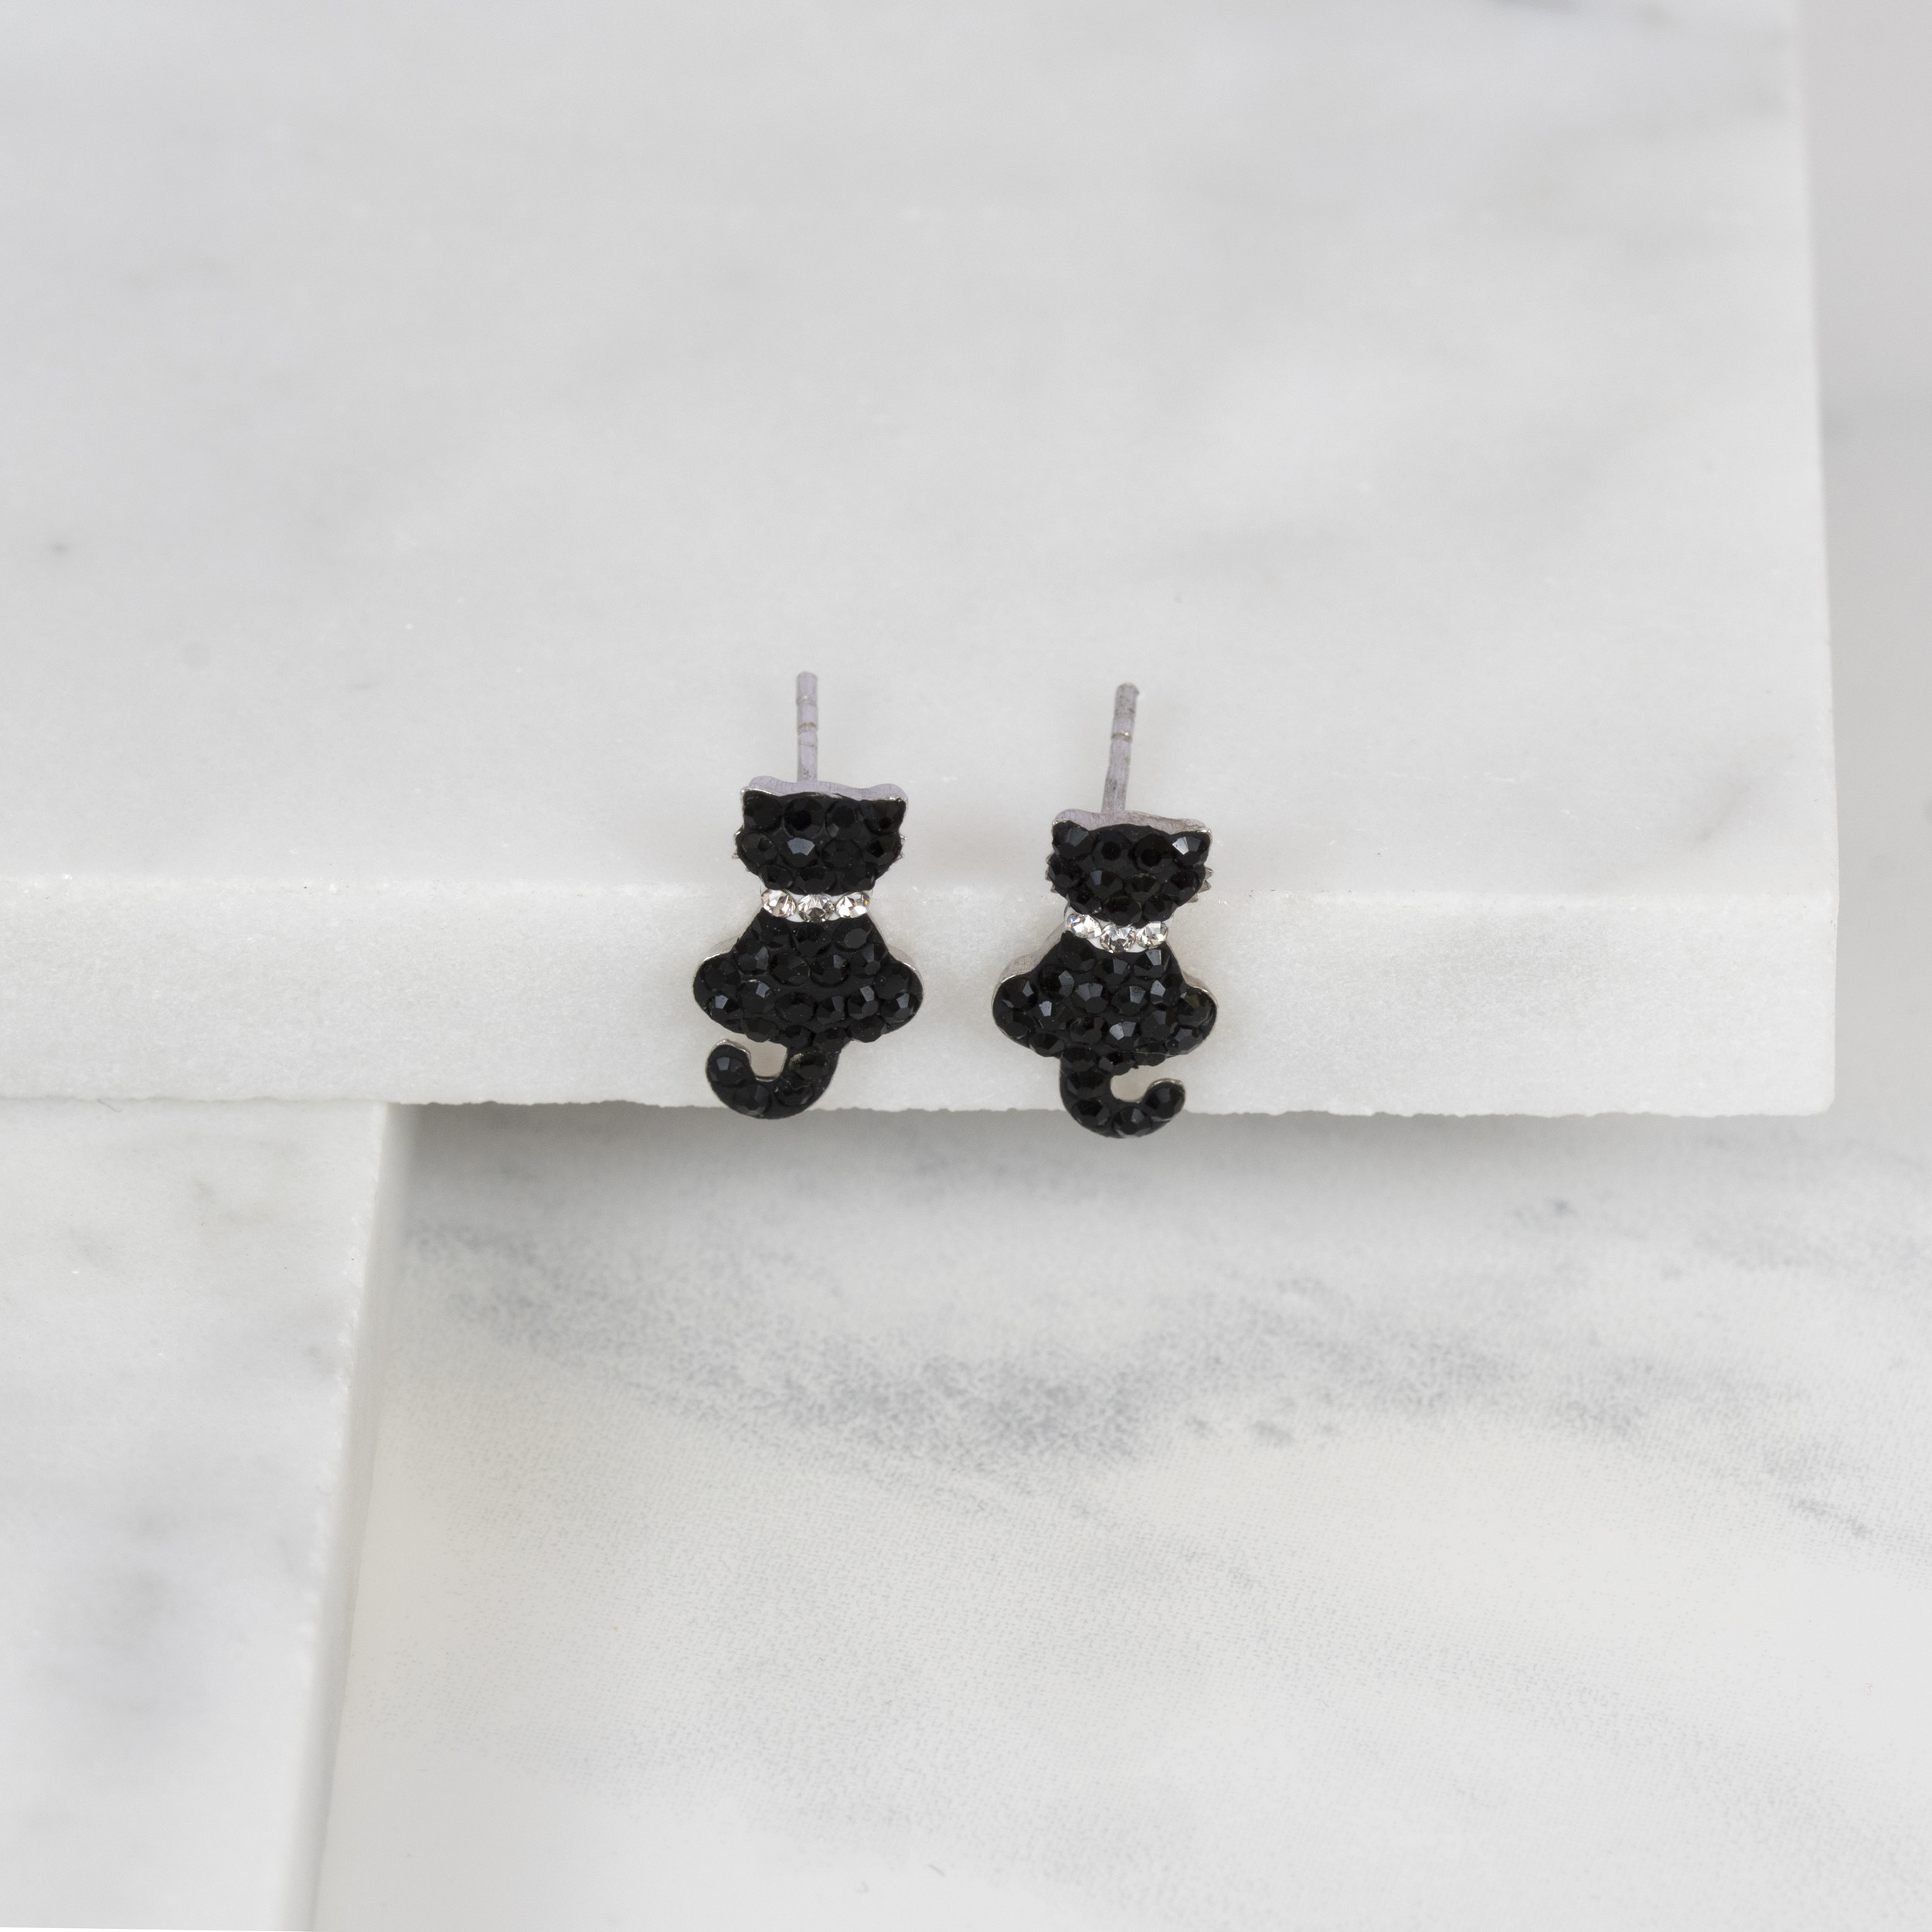 A pair of black and white rhinestone stud earings in the shape of two black cats